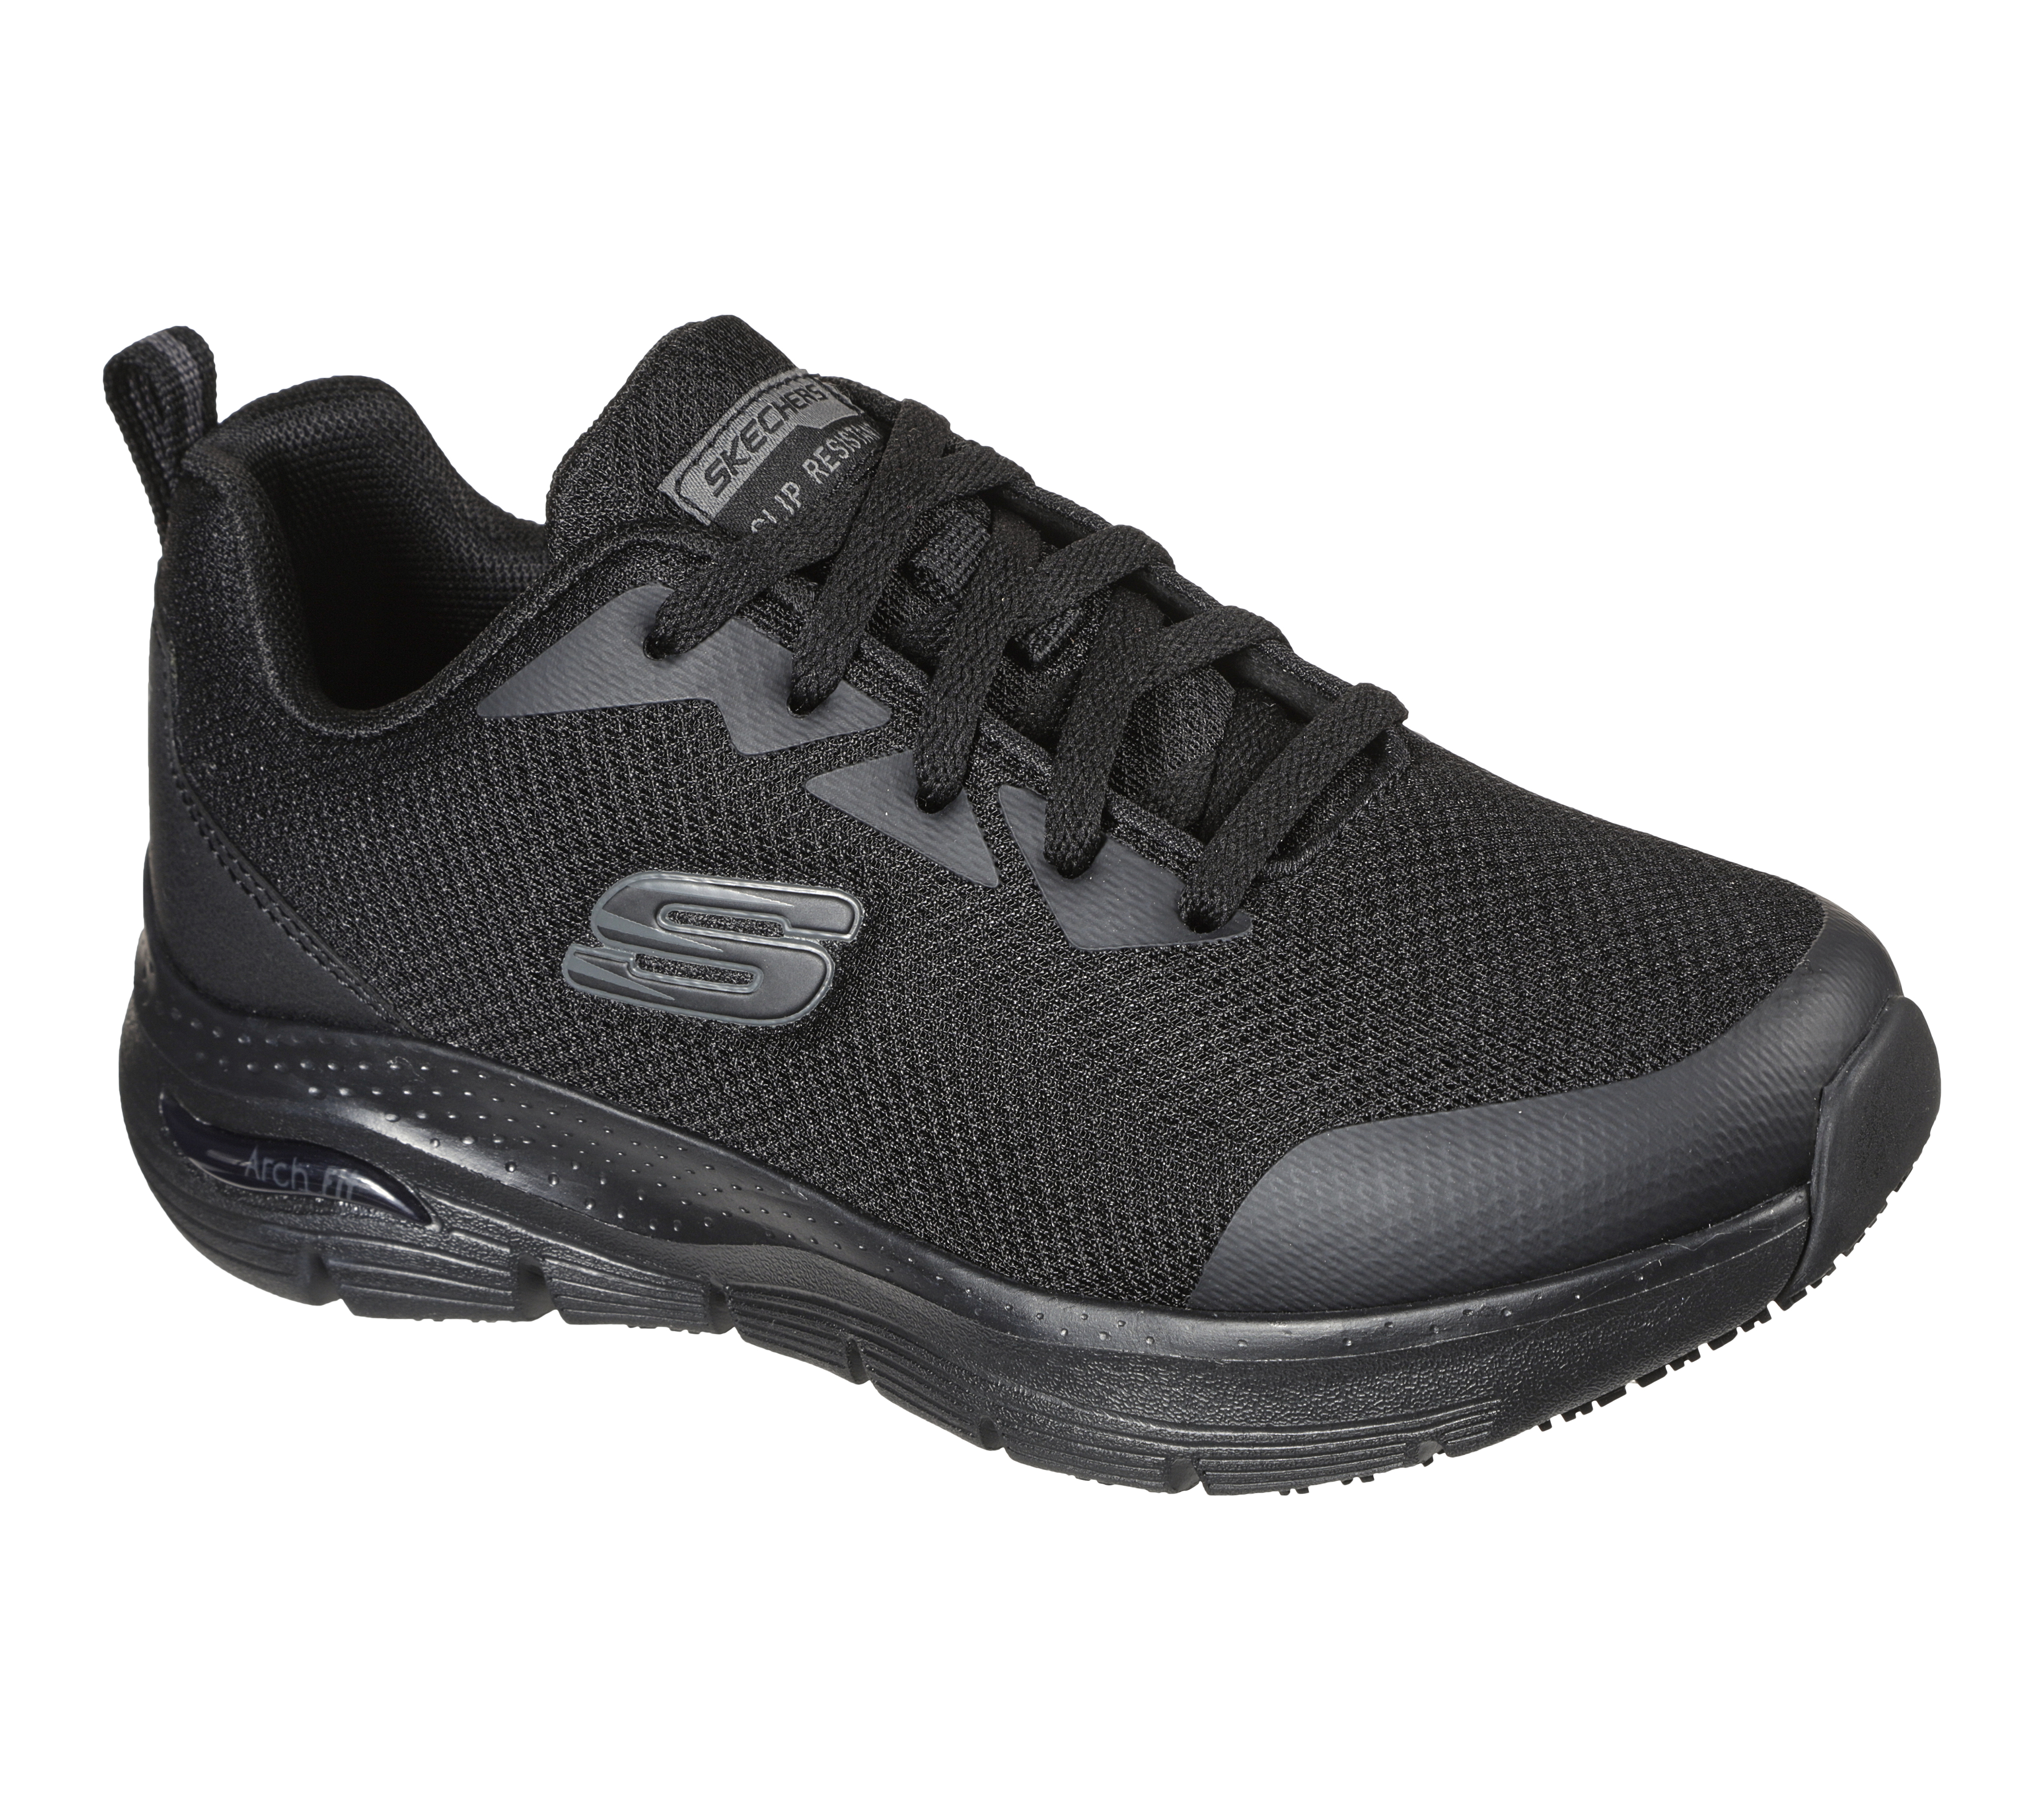 slip resistant work shoes with arch support